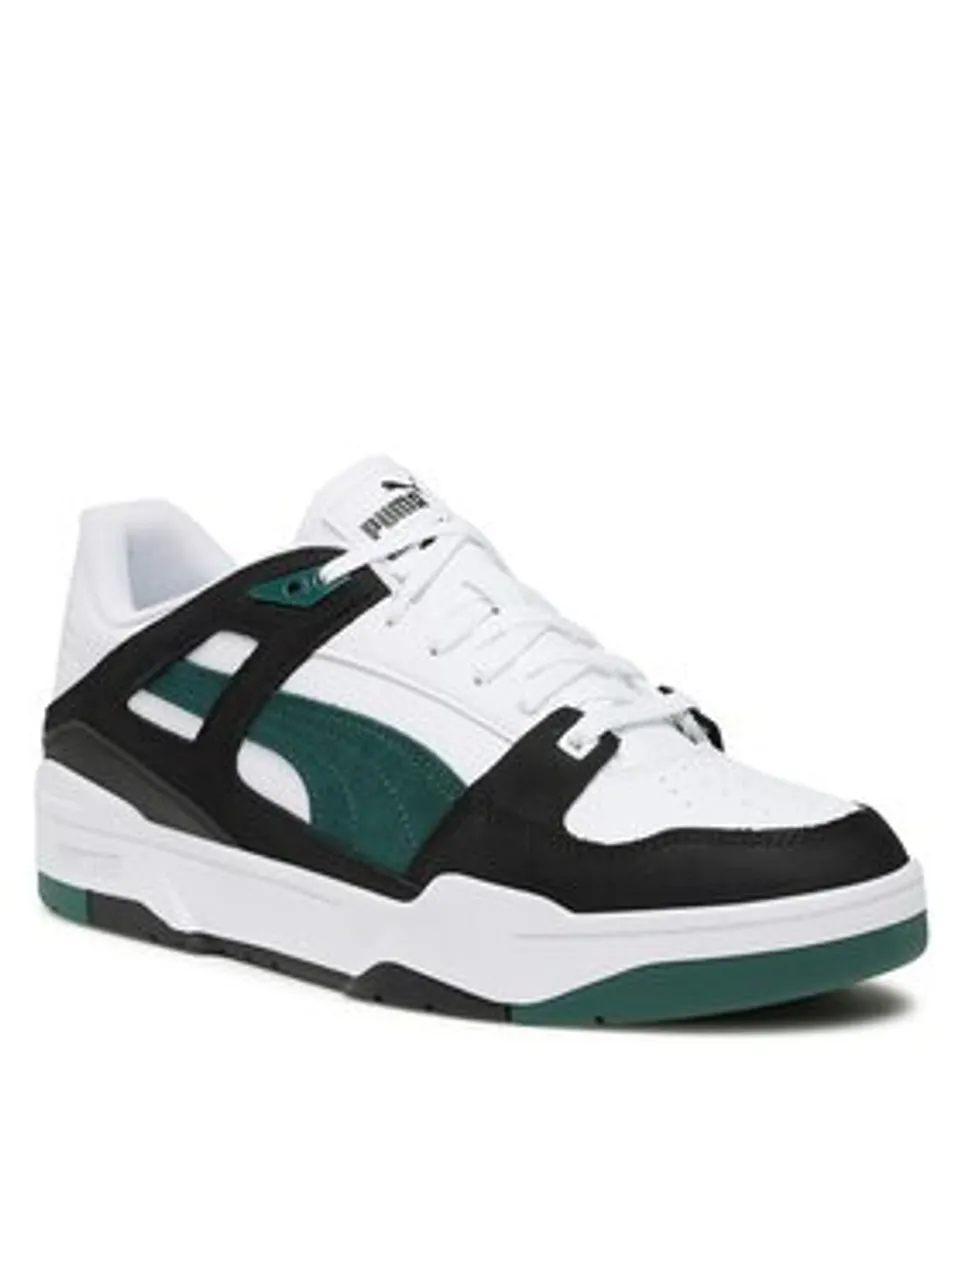 Puma Sneakers Slipstream Box Out 394789 01 Weiß